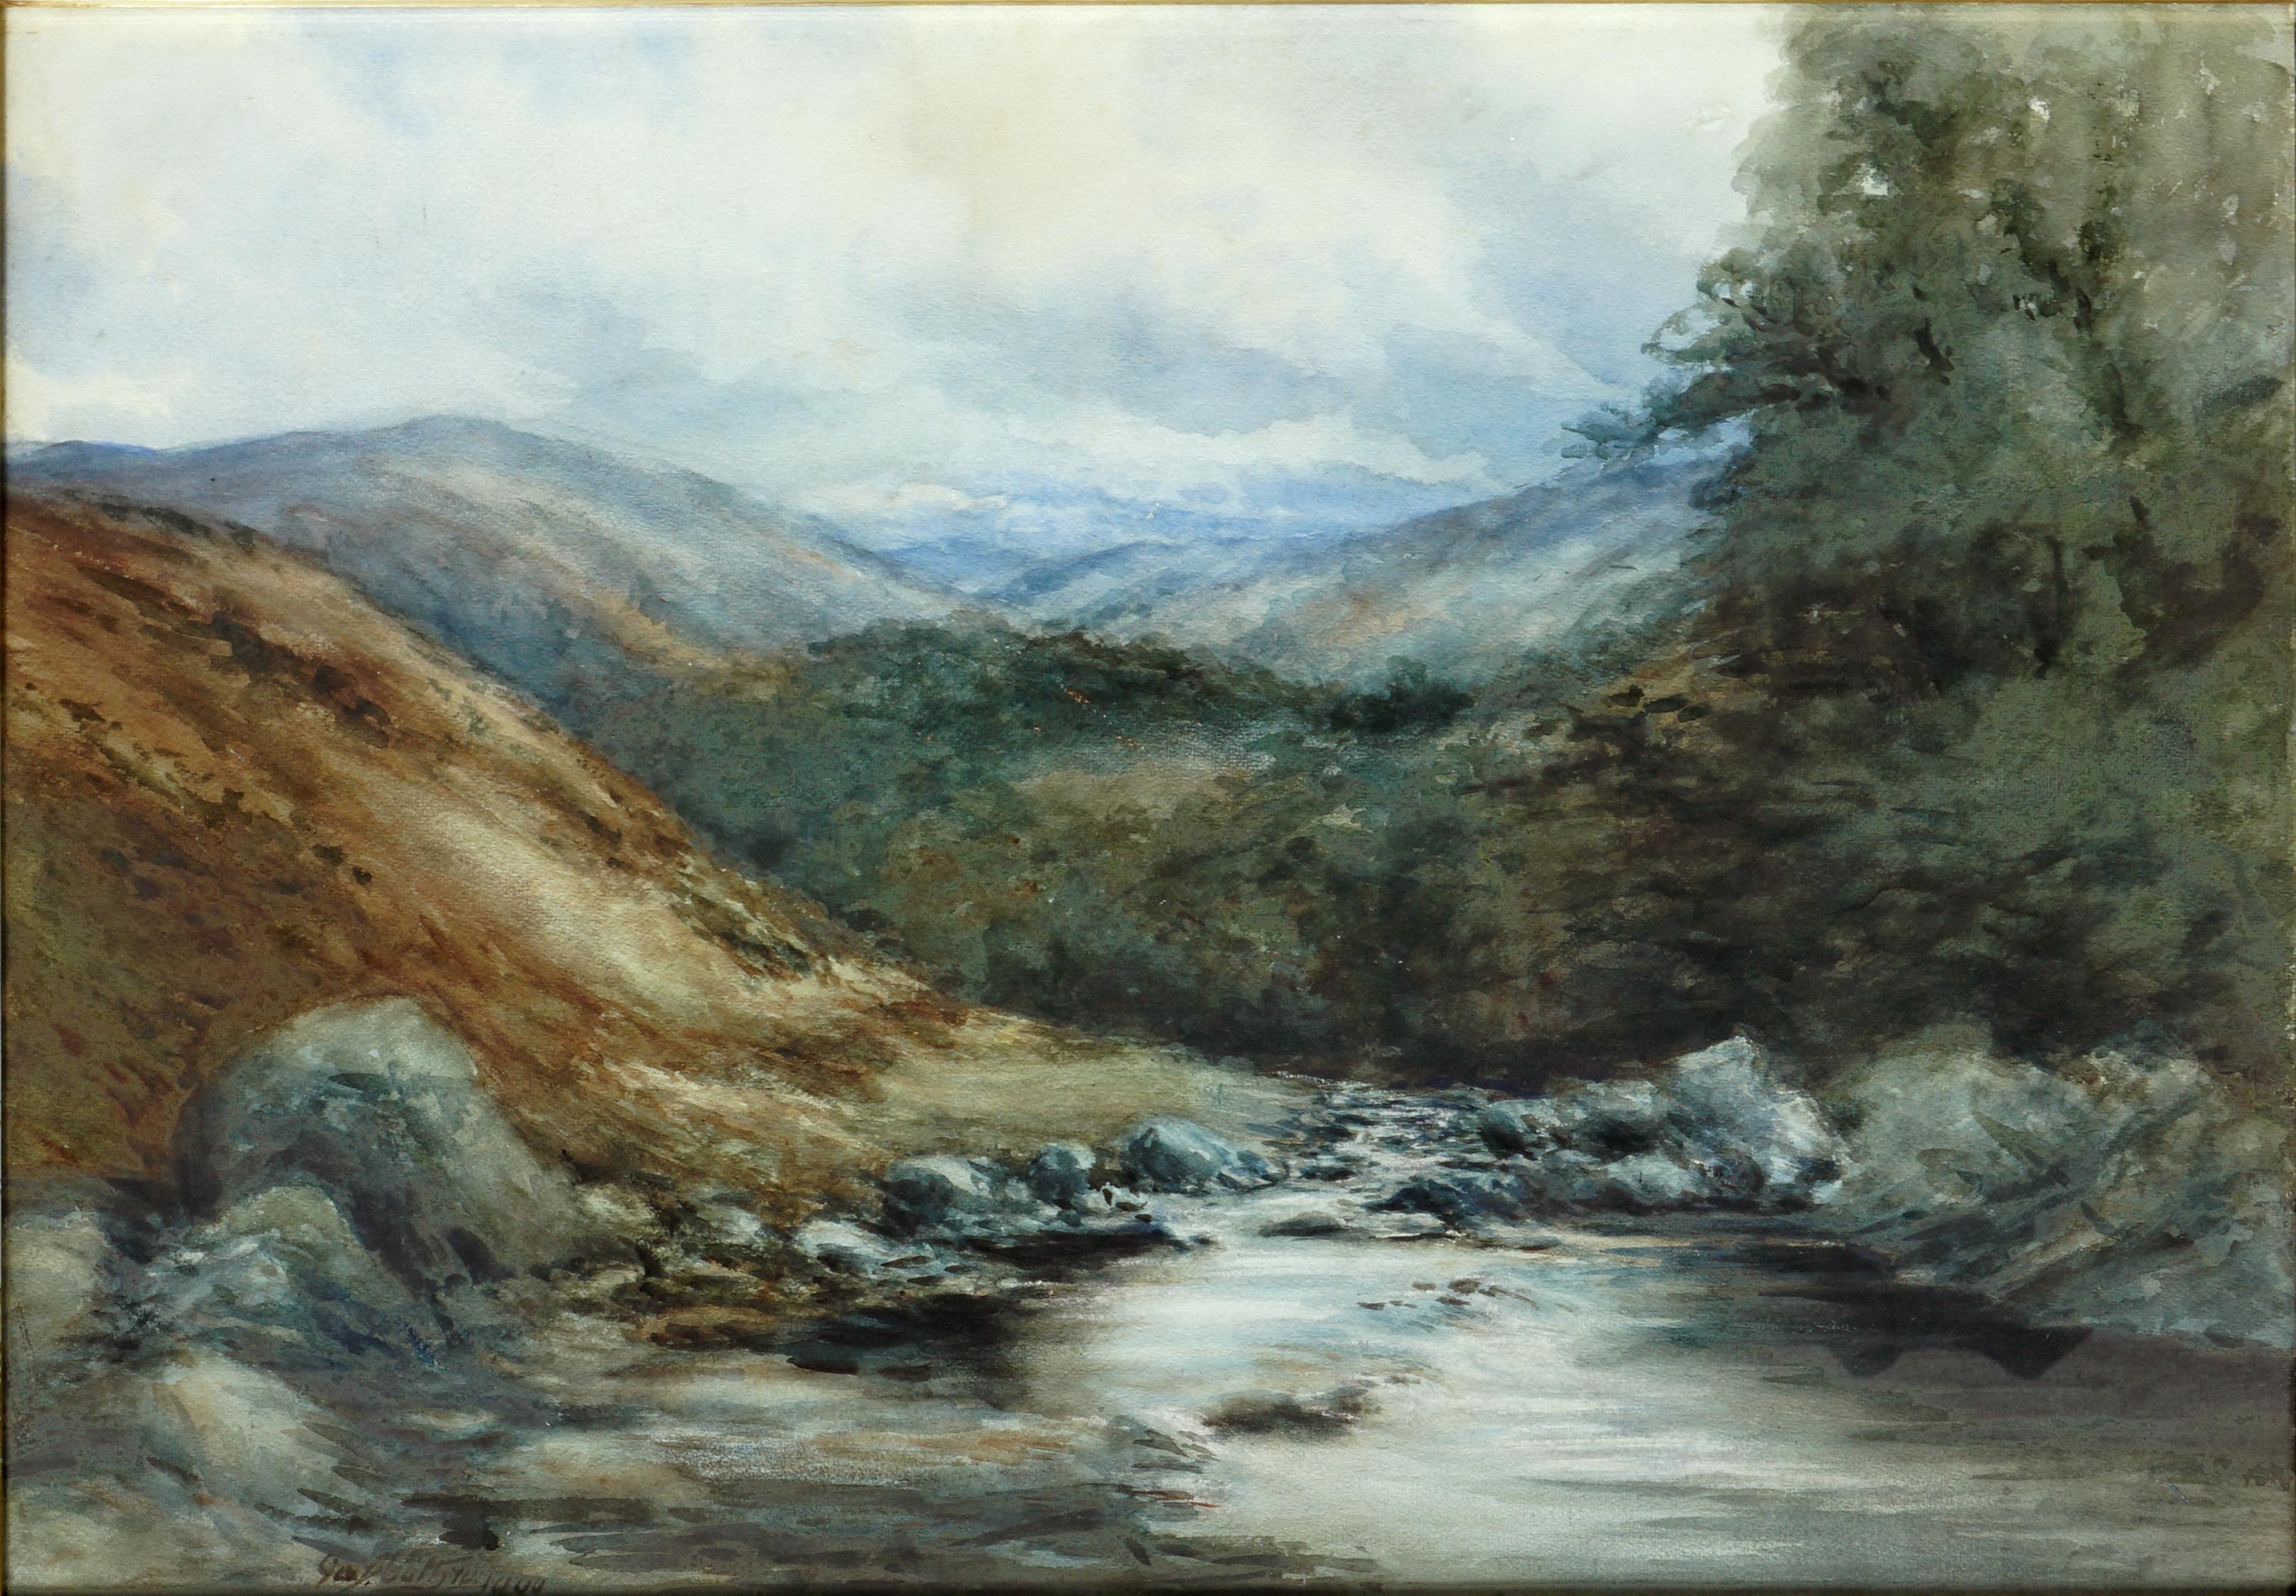 The River Dee, Balmoral, Scotland - Early 20th Century Landscape - Art by George S. Cathro